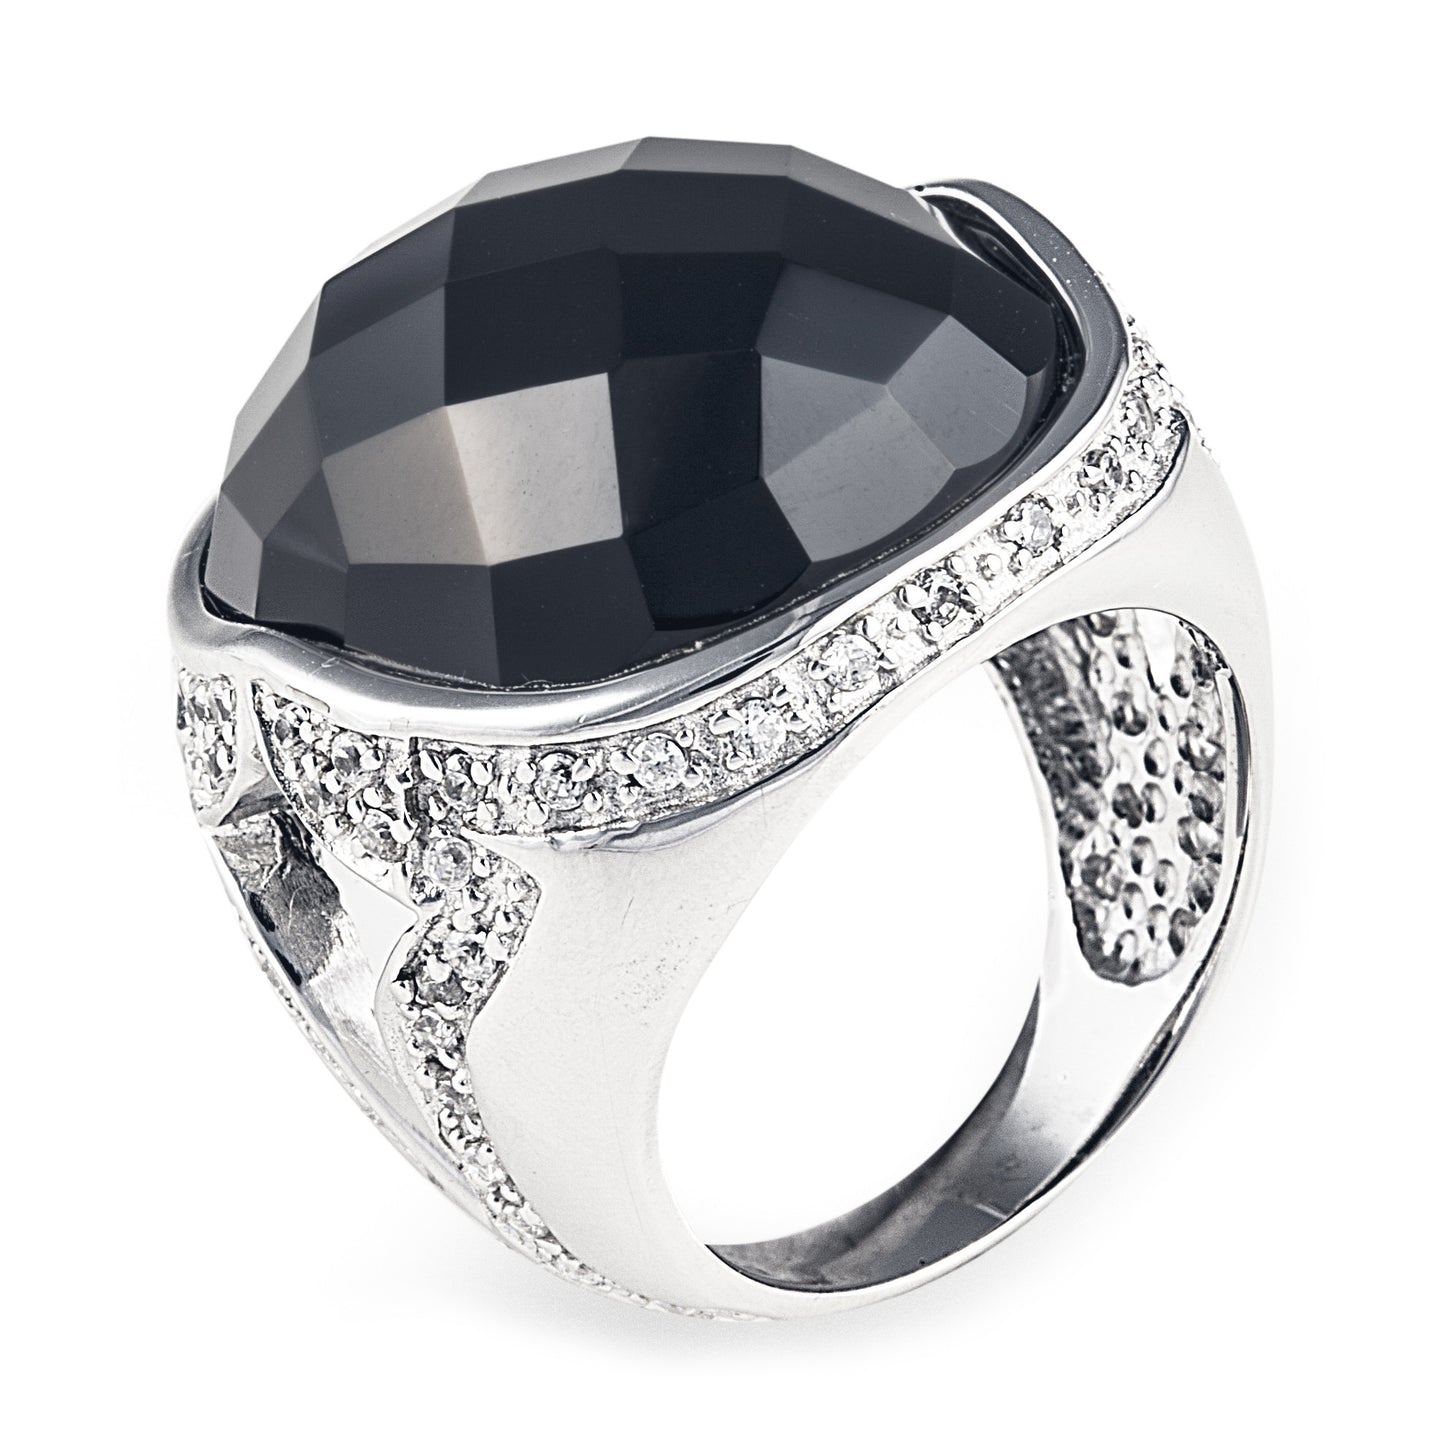 The Black Night Lopez Ring is an elegant 925 sterling silver ring featuring a beautiful side pattern encrusted with cubic zirconia stones that hold in place a stunning facet cut black onyx that grabs lots of attention. Worldwide Shipping. Free shipping for orders over $150.00 within Australia.